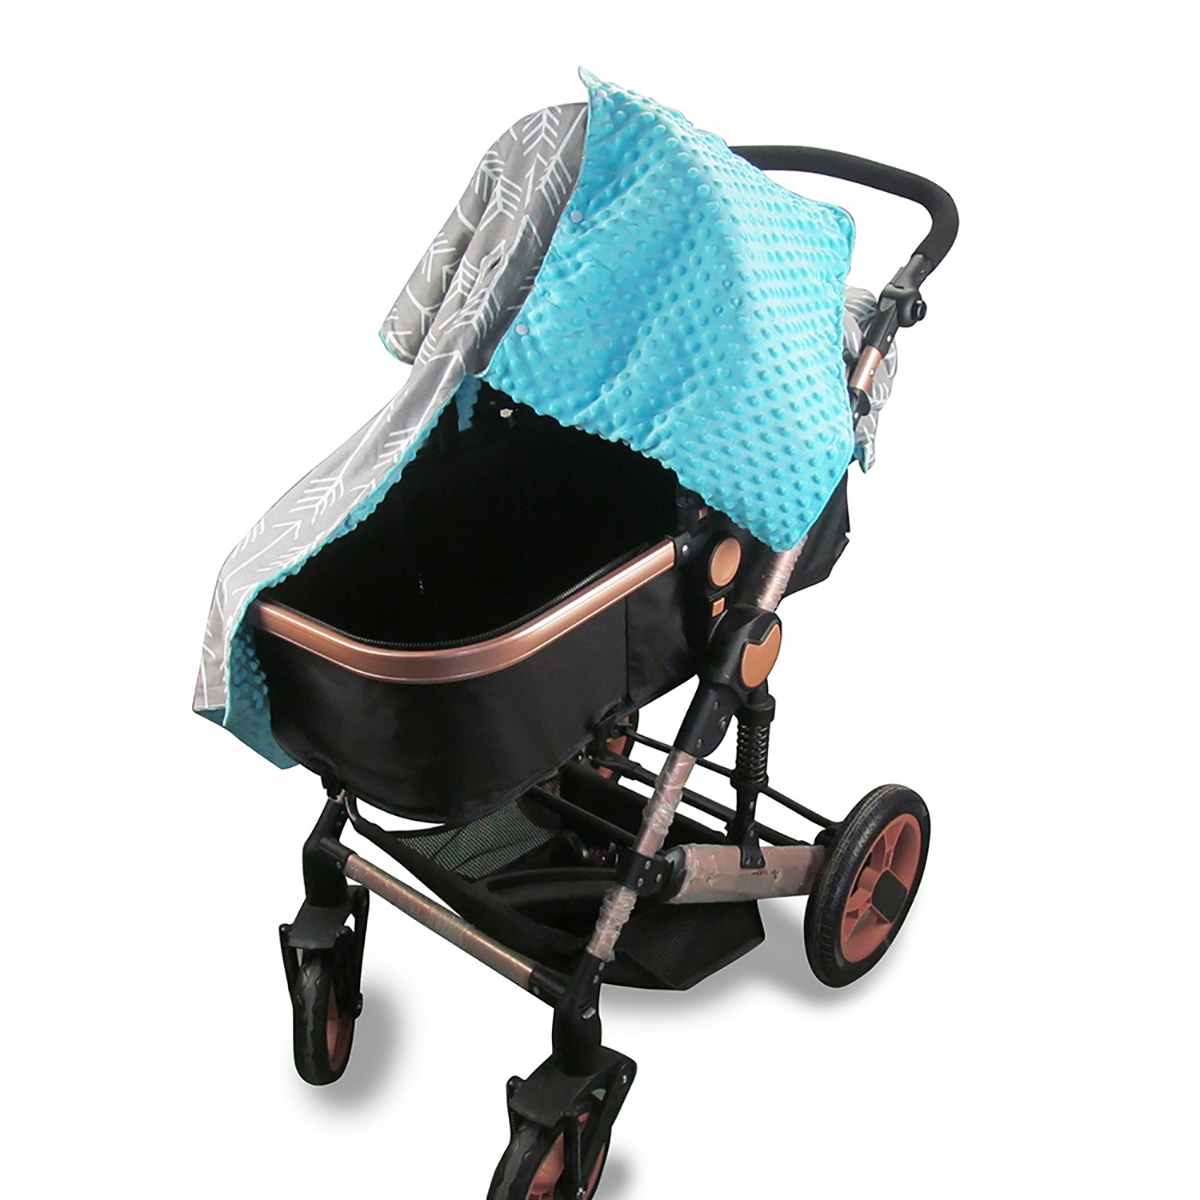 4-IN-1-Thickened-Multi-Use-Stroller-Cart-Seat-Cover-Breastfeeding-Nursing-Scarf-Snug-Warm-Breathable-1810349-5